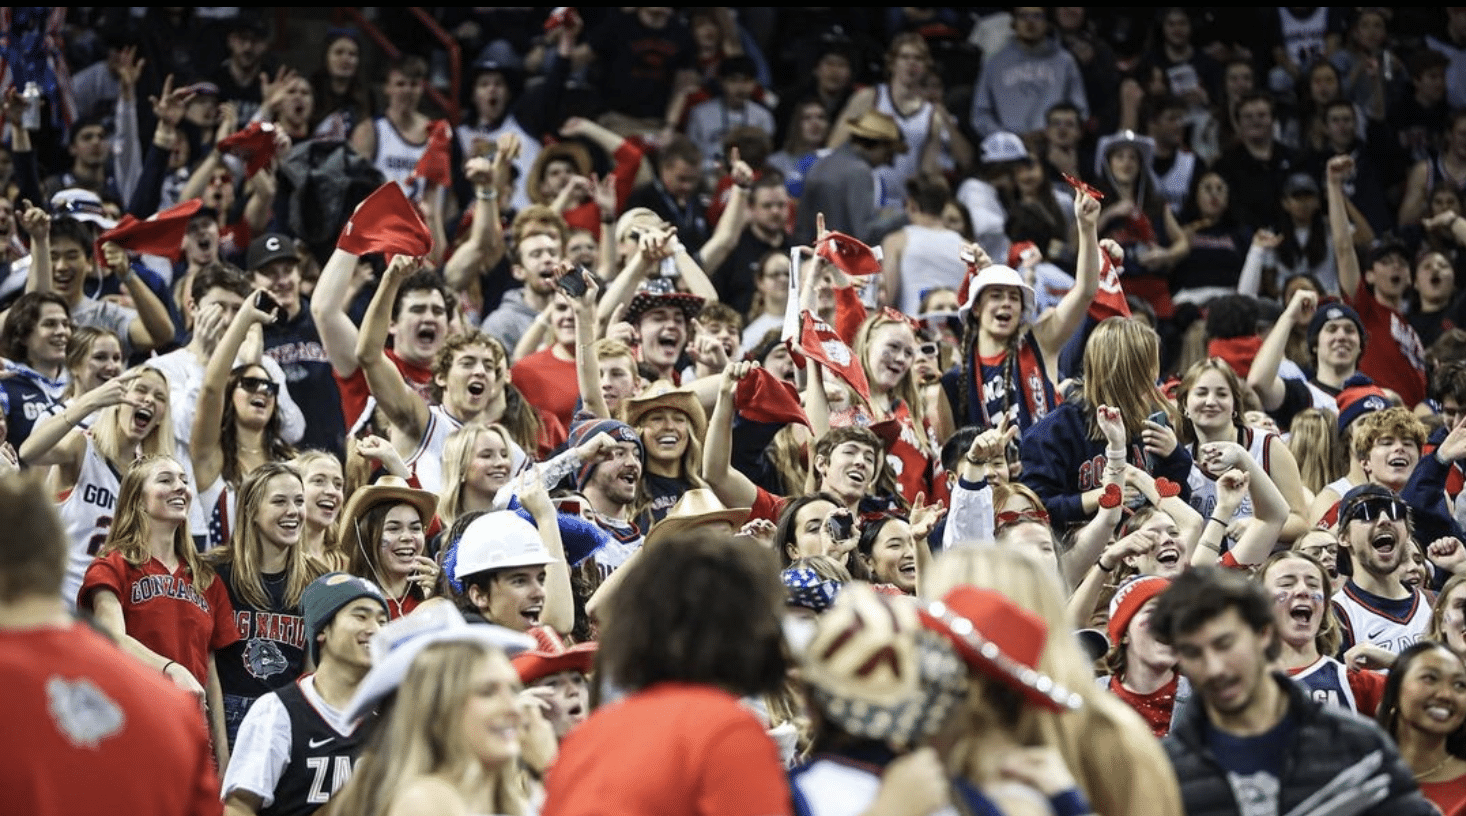 Gonzaga Kennel Club student section passionately cheering and supporting their team with unwavering enthusiasm